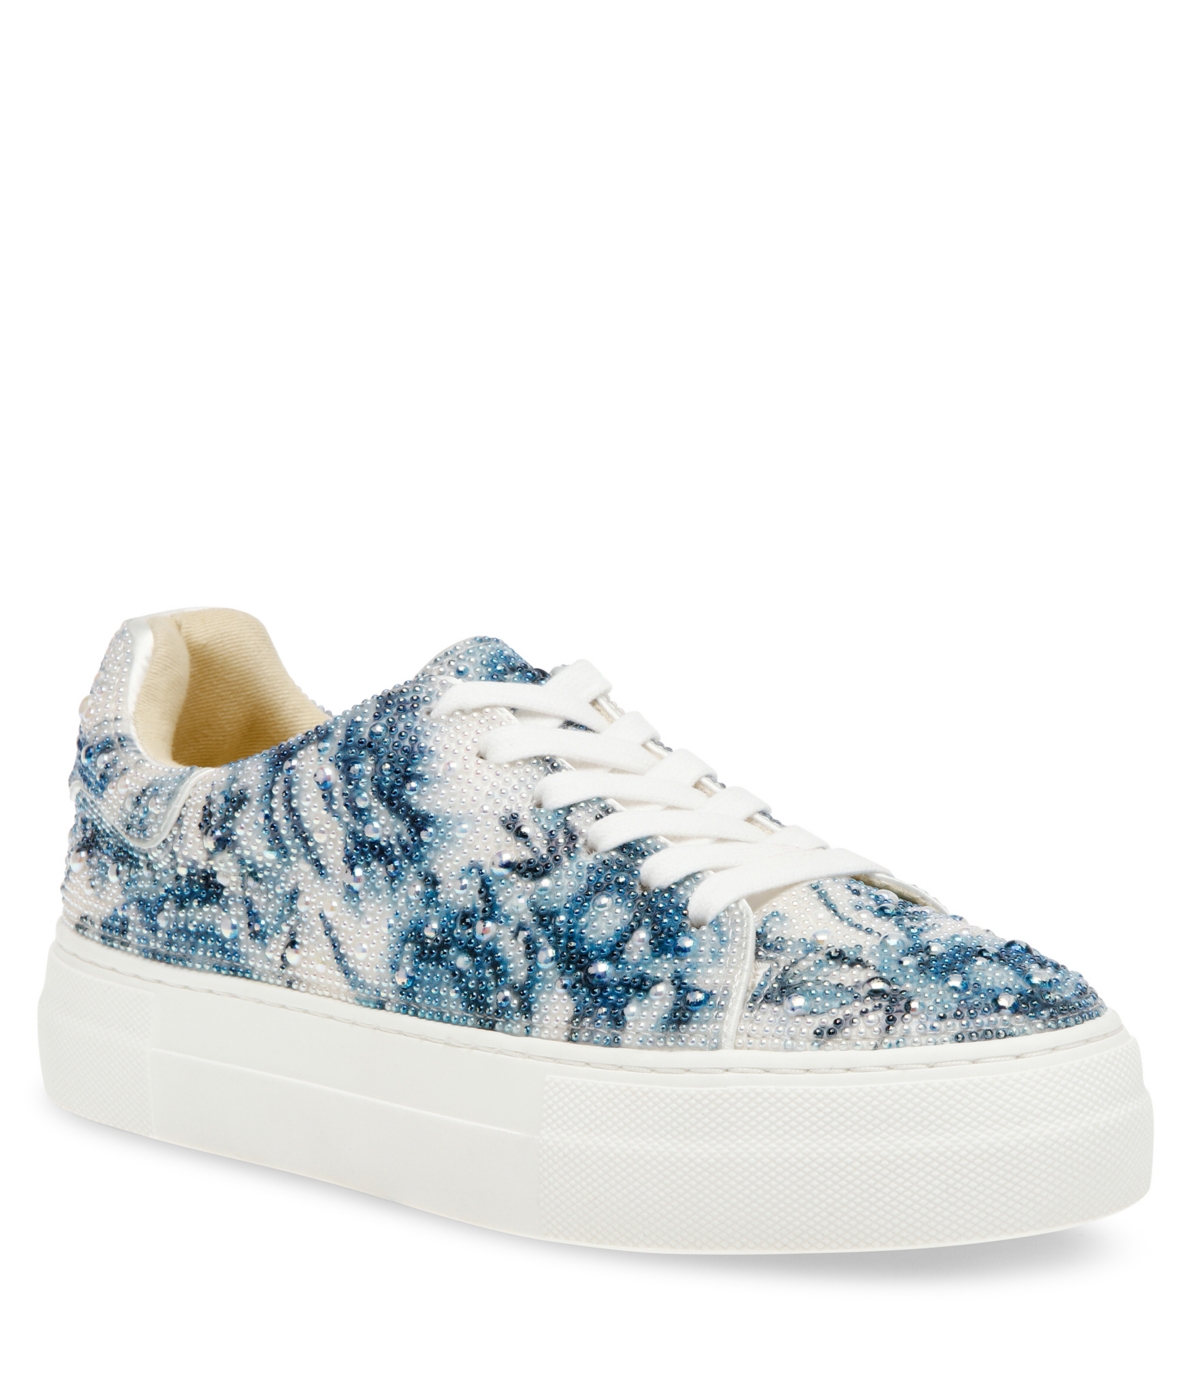 Betsey Johnson Sb-sidny Rhinestone Sneakers In Blue Floral